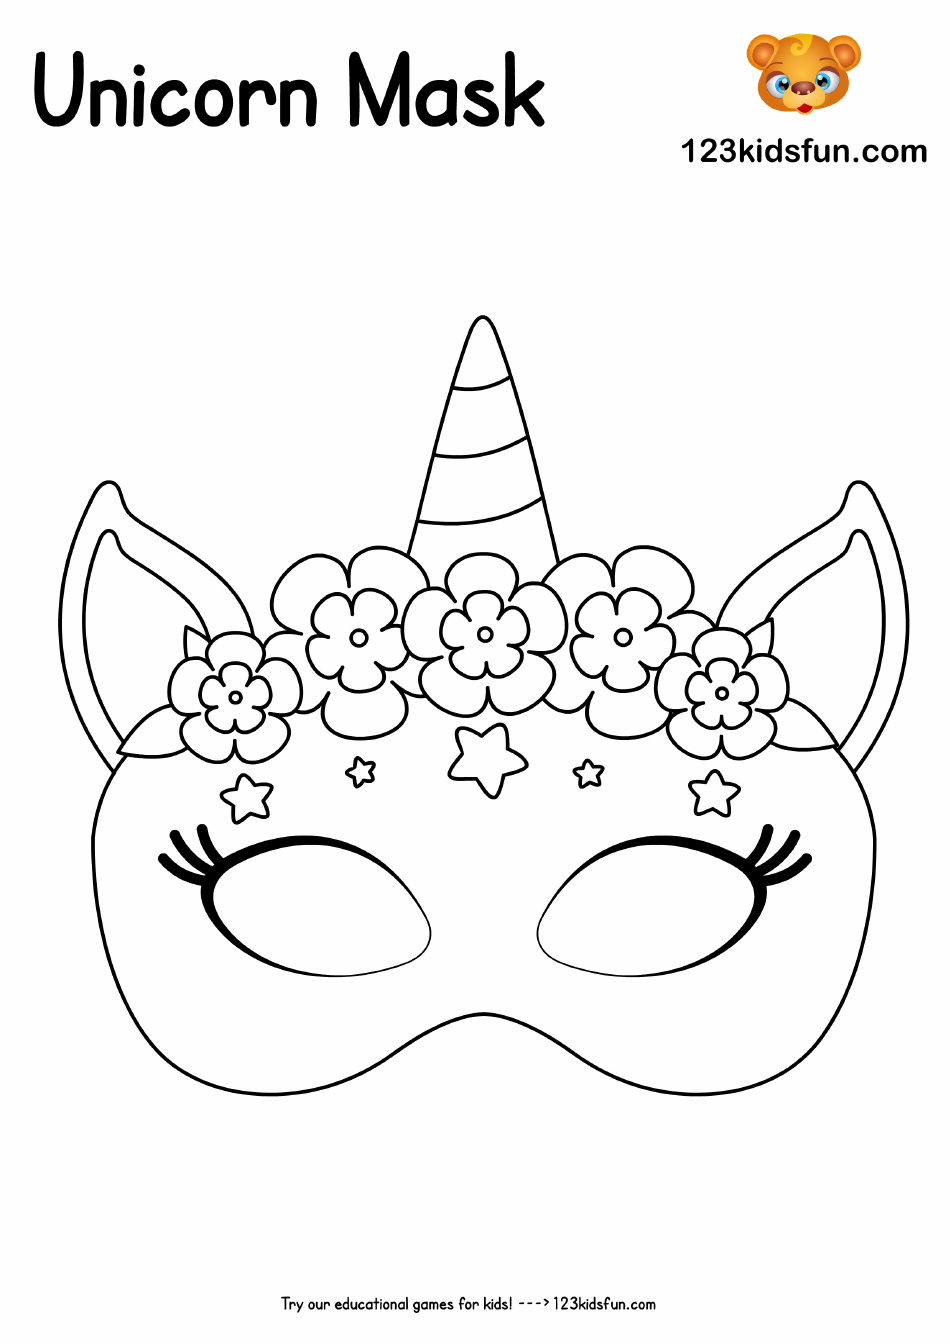 Unicorn Mask Coloring Template - Flowers, Page 1